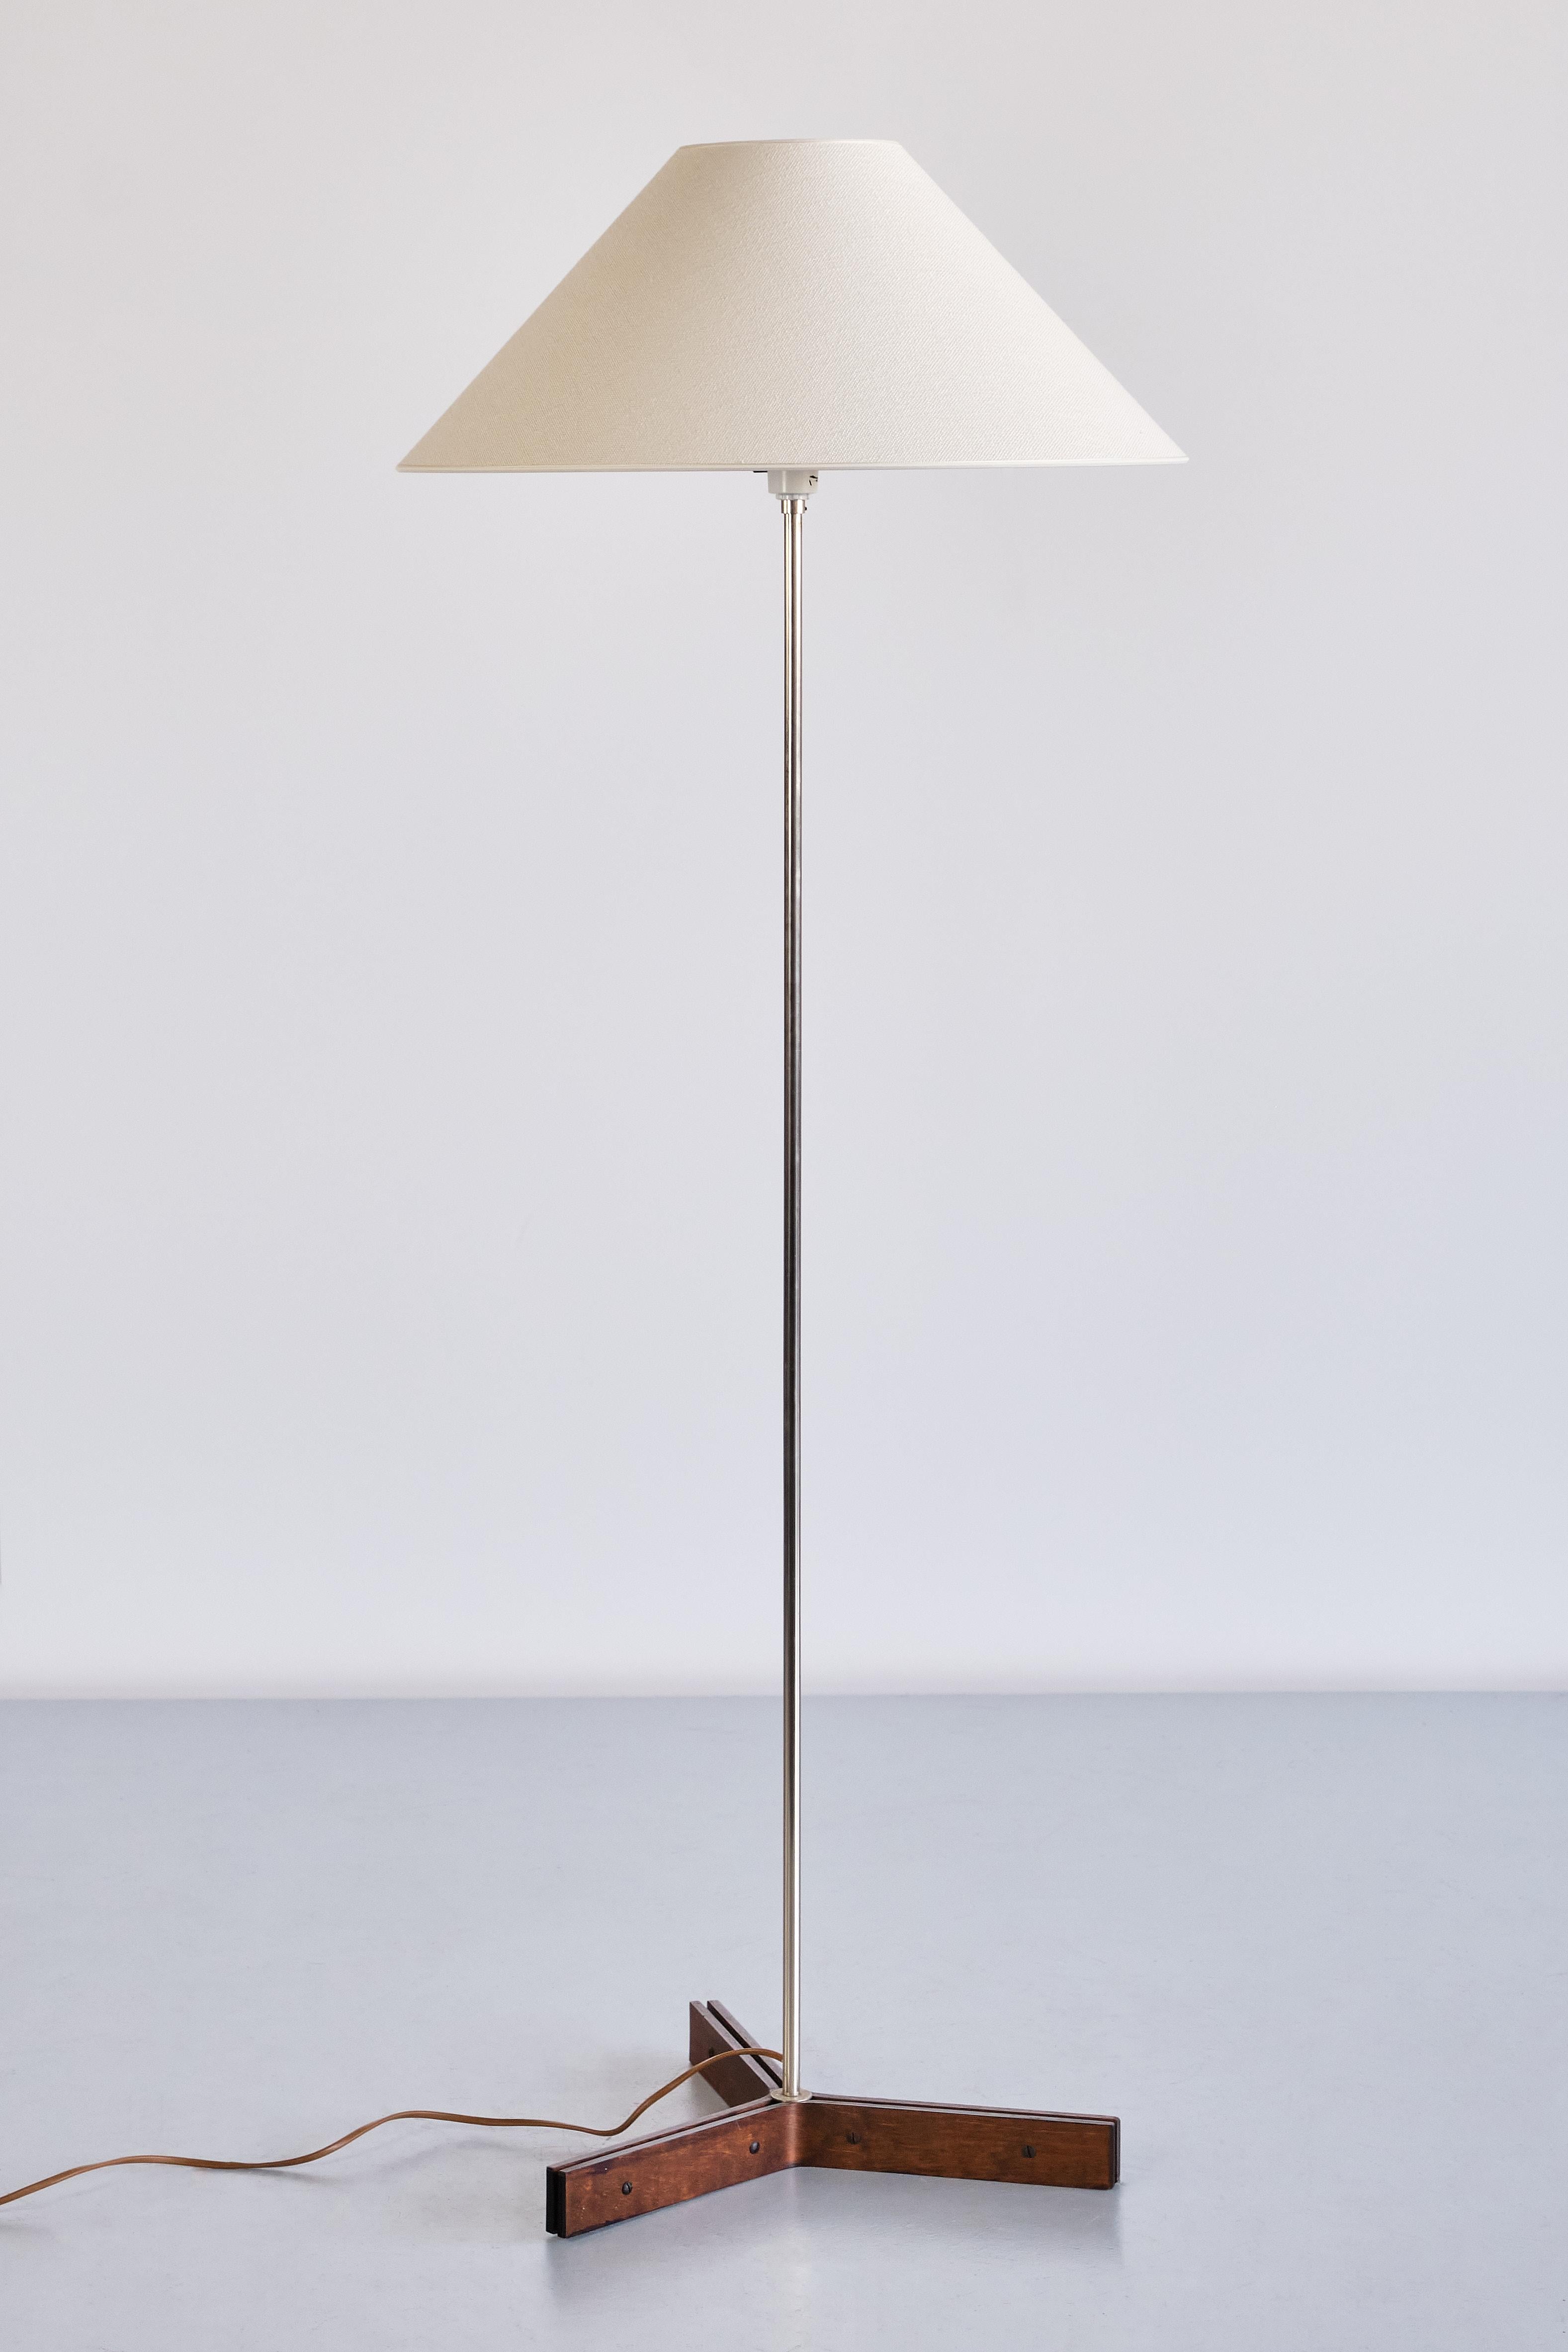 This elegant, tall floor lamp was produced by the Swedish manufacturer NAF Nybro Armatur Fabriken in the 1970s. The design is marked by the central thin stem in silver steel, resting on a triangular base. The base is made of curved strips of wengé